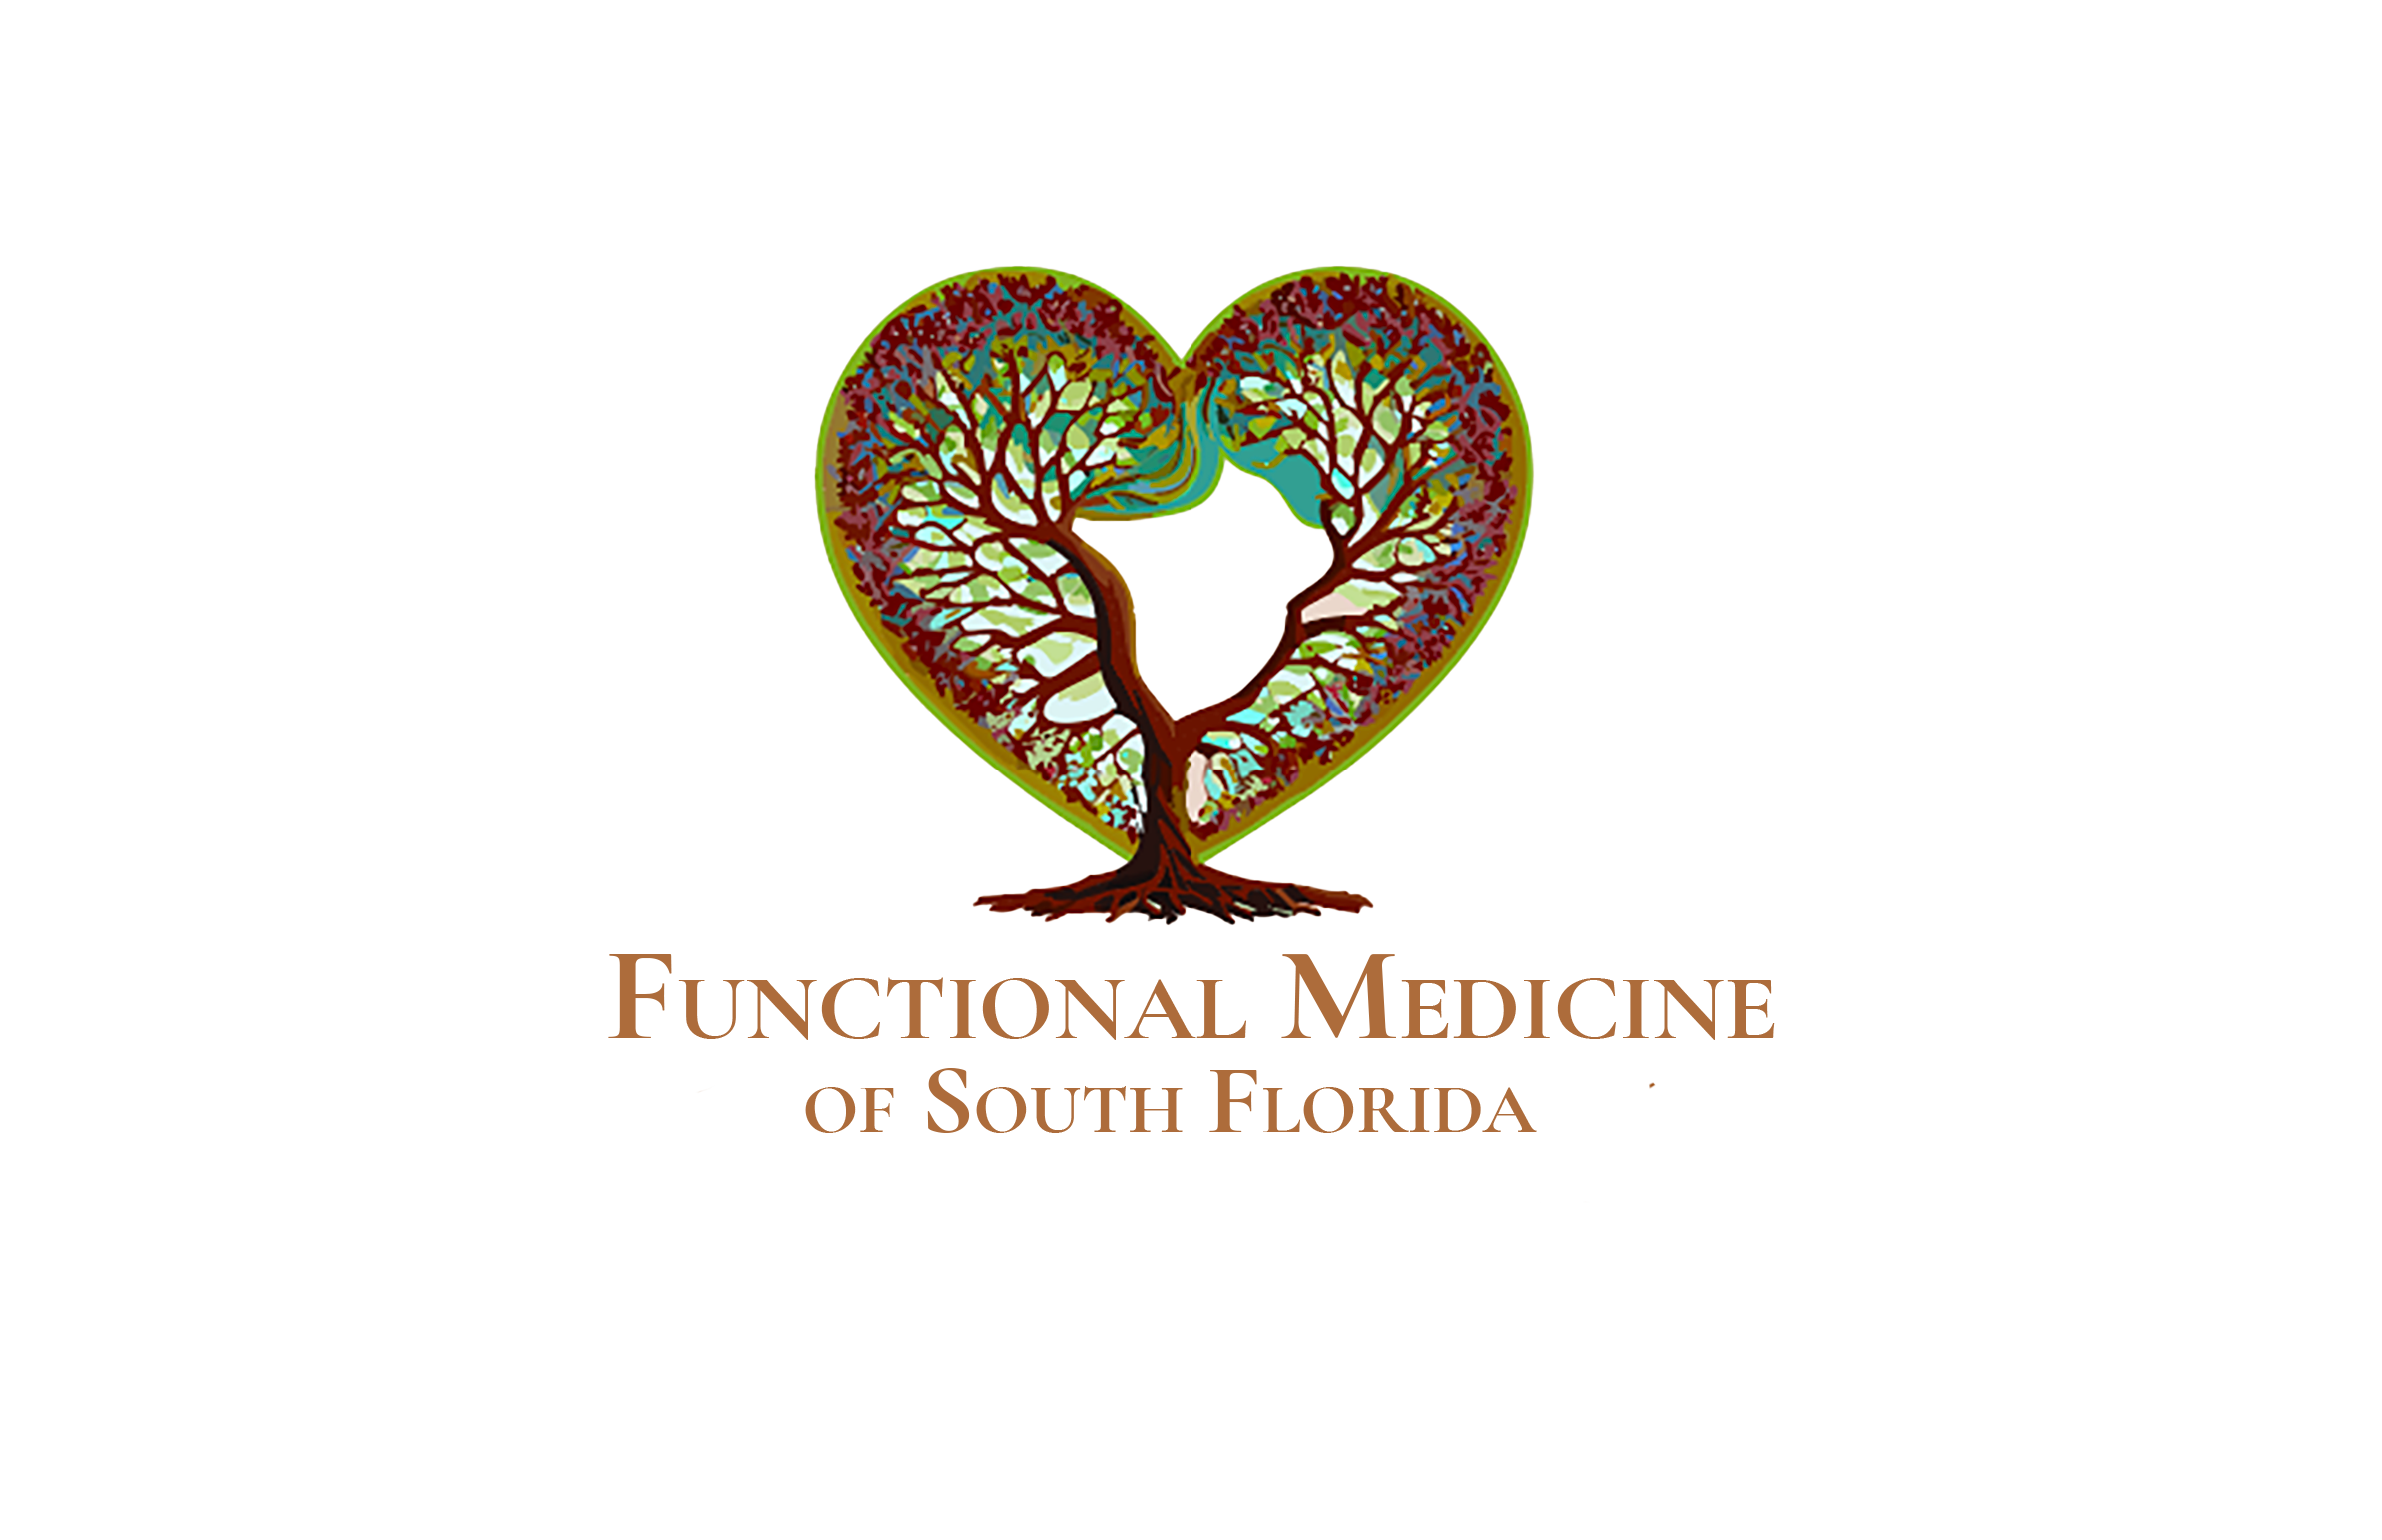 Functional Medicine of South Florida